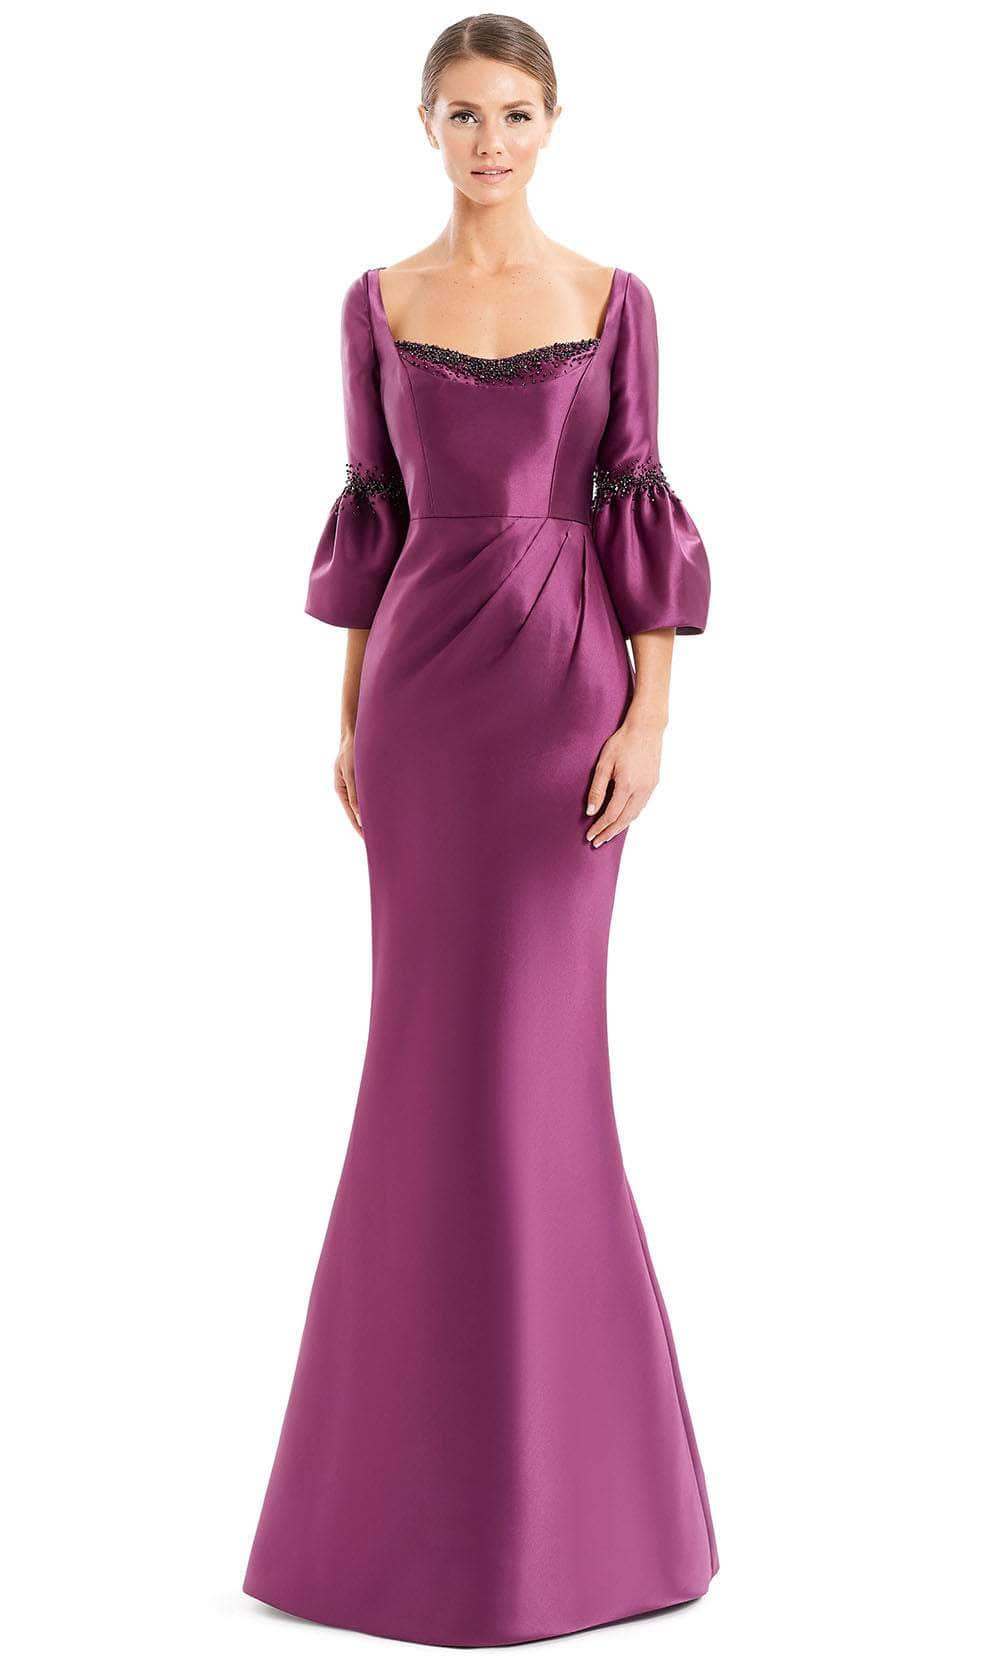 Alexander By Daymor 1659F22 - Mermaid Skirt Formal Gown Special Occasion Dress